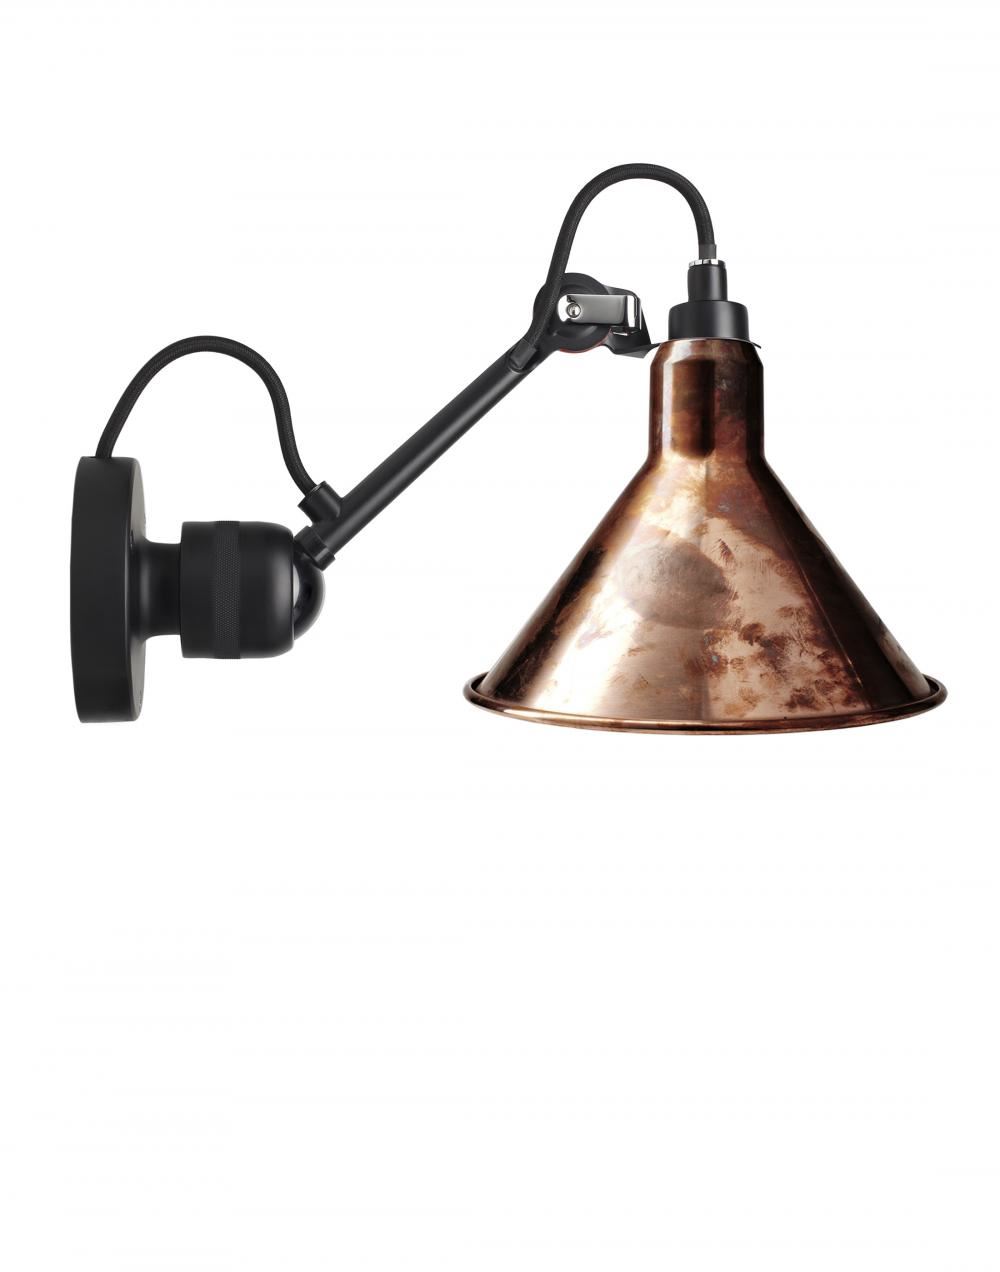 Lampe Gras 304 Small Wall Light Black Arm Raw Copper Shade With White Interior Conic Hardwired